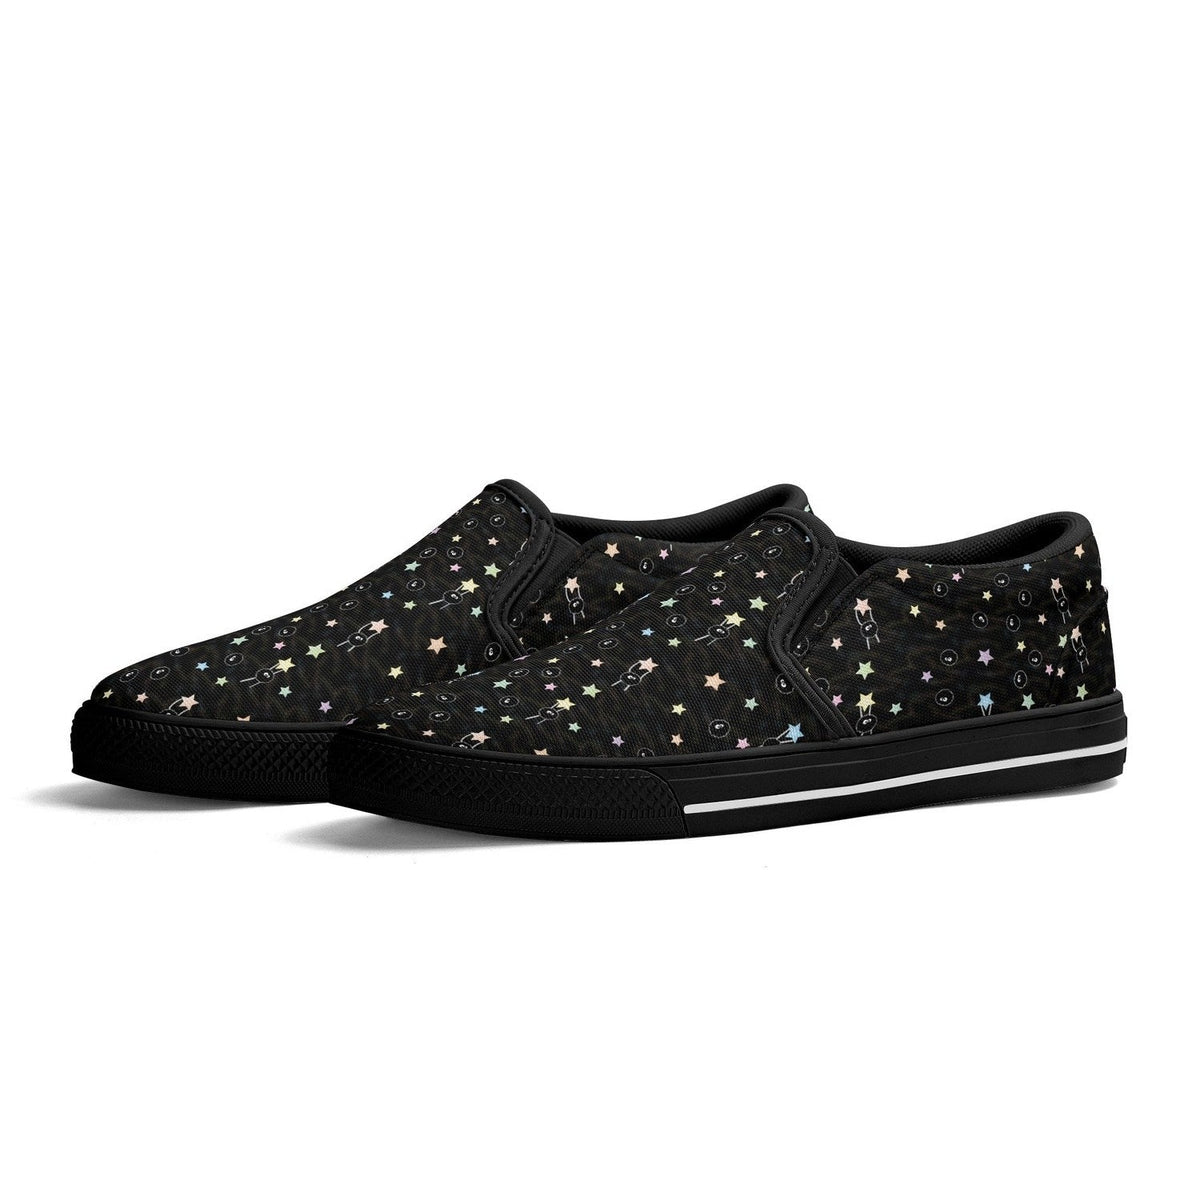 Soot Women's Slip On Shoes